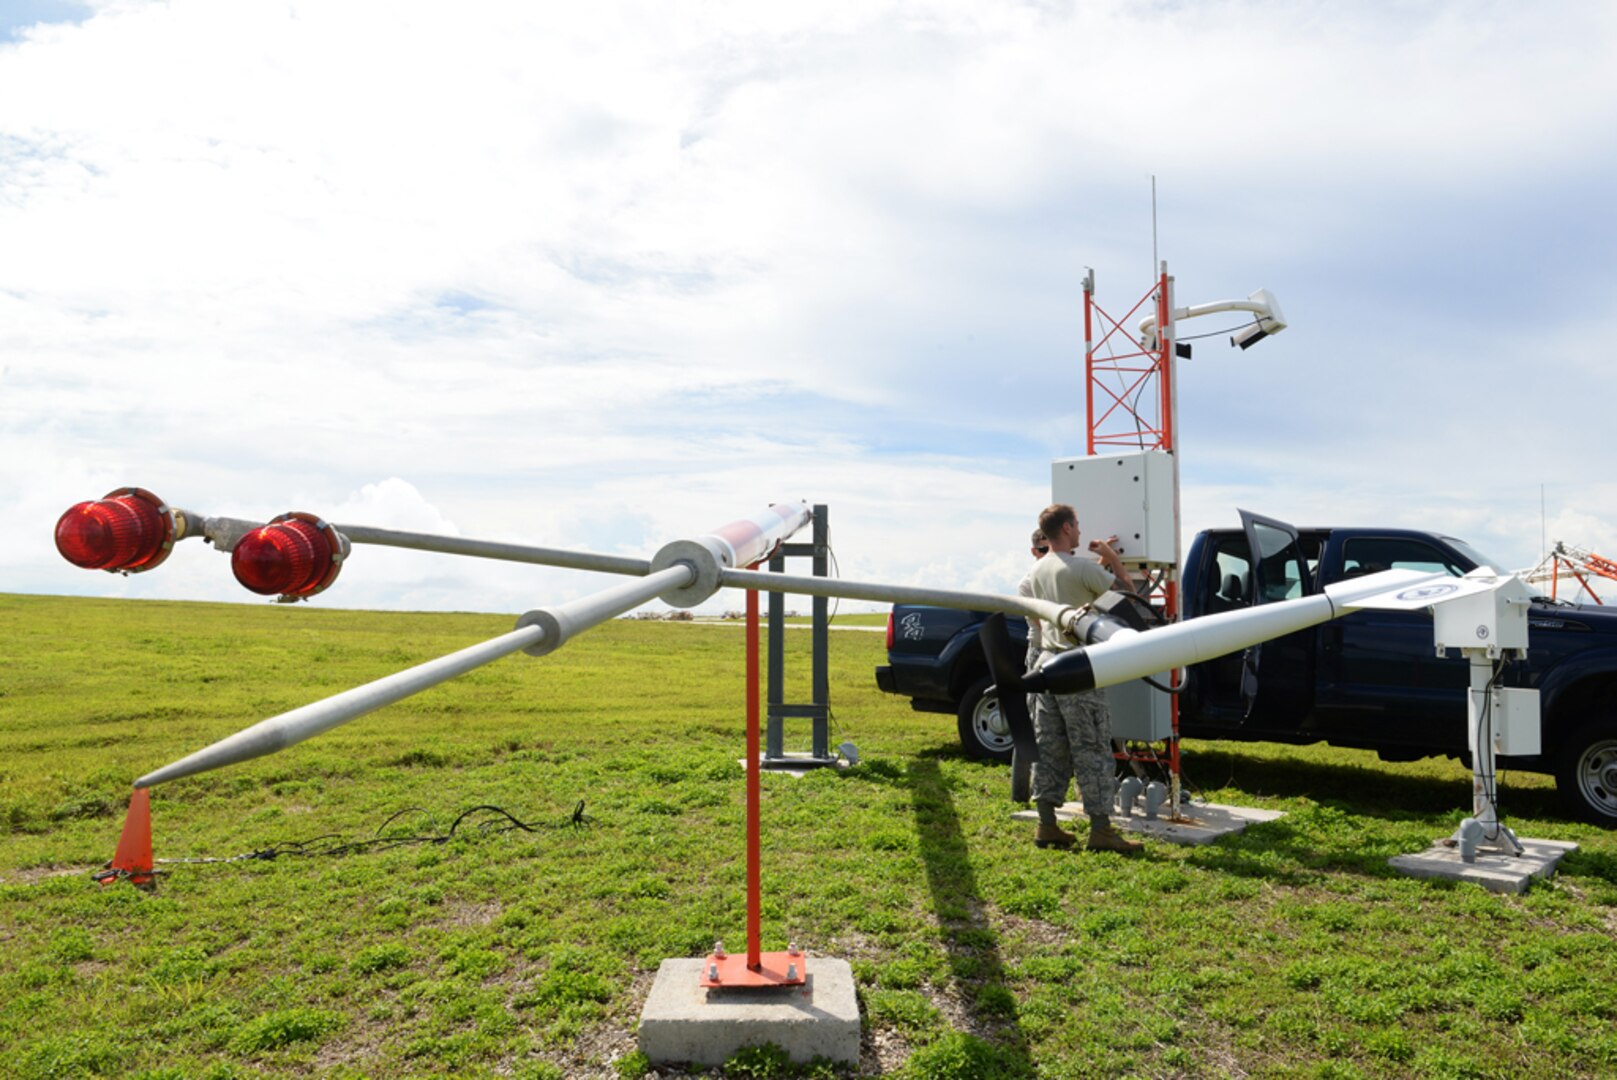 ANDERSEN AIR FORCE BASE, Guam (June 2, 2015) - Airfield systems Airmen from the 36th Operations Support Squadron open a field data collection unit. The technicians check circuits within the unit for arch burns, blown fuses, loose wires and missing parts to ensure life-saving equipment is operational at all times. 